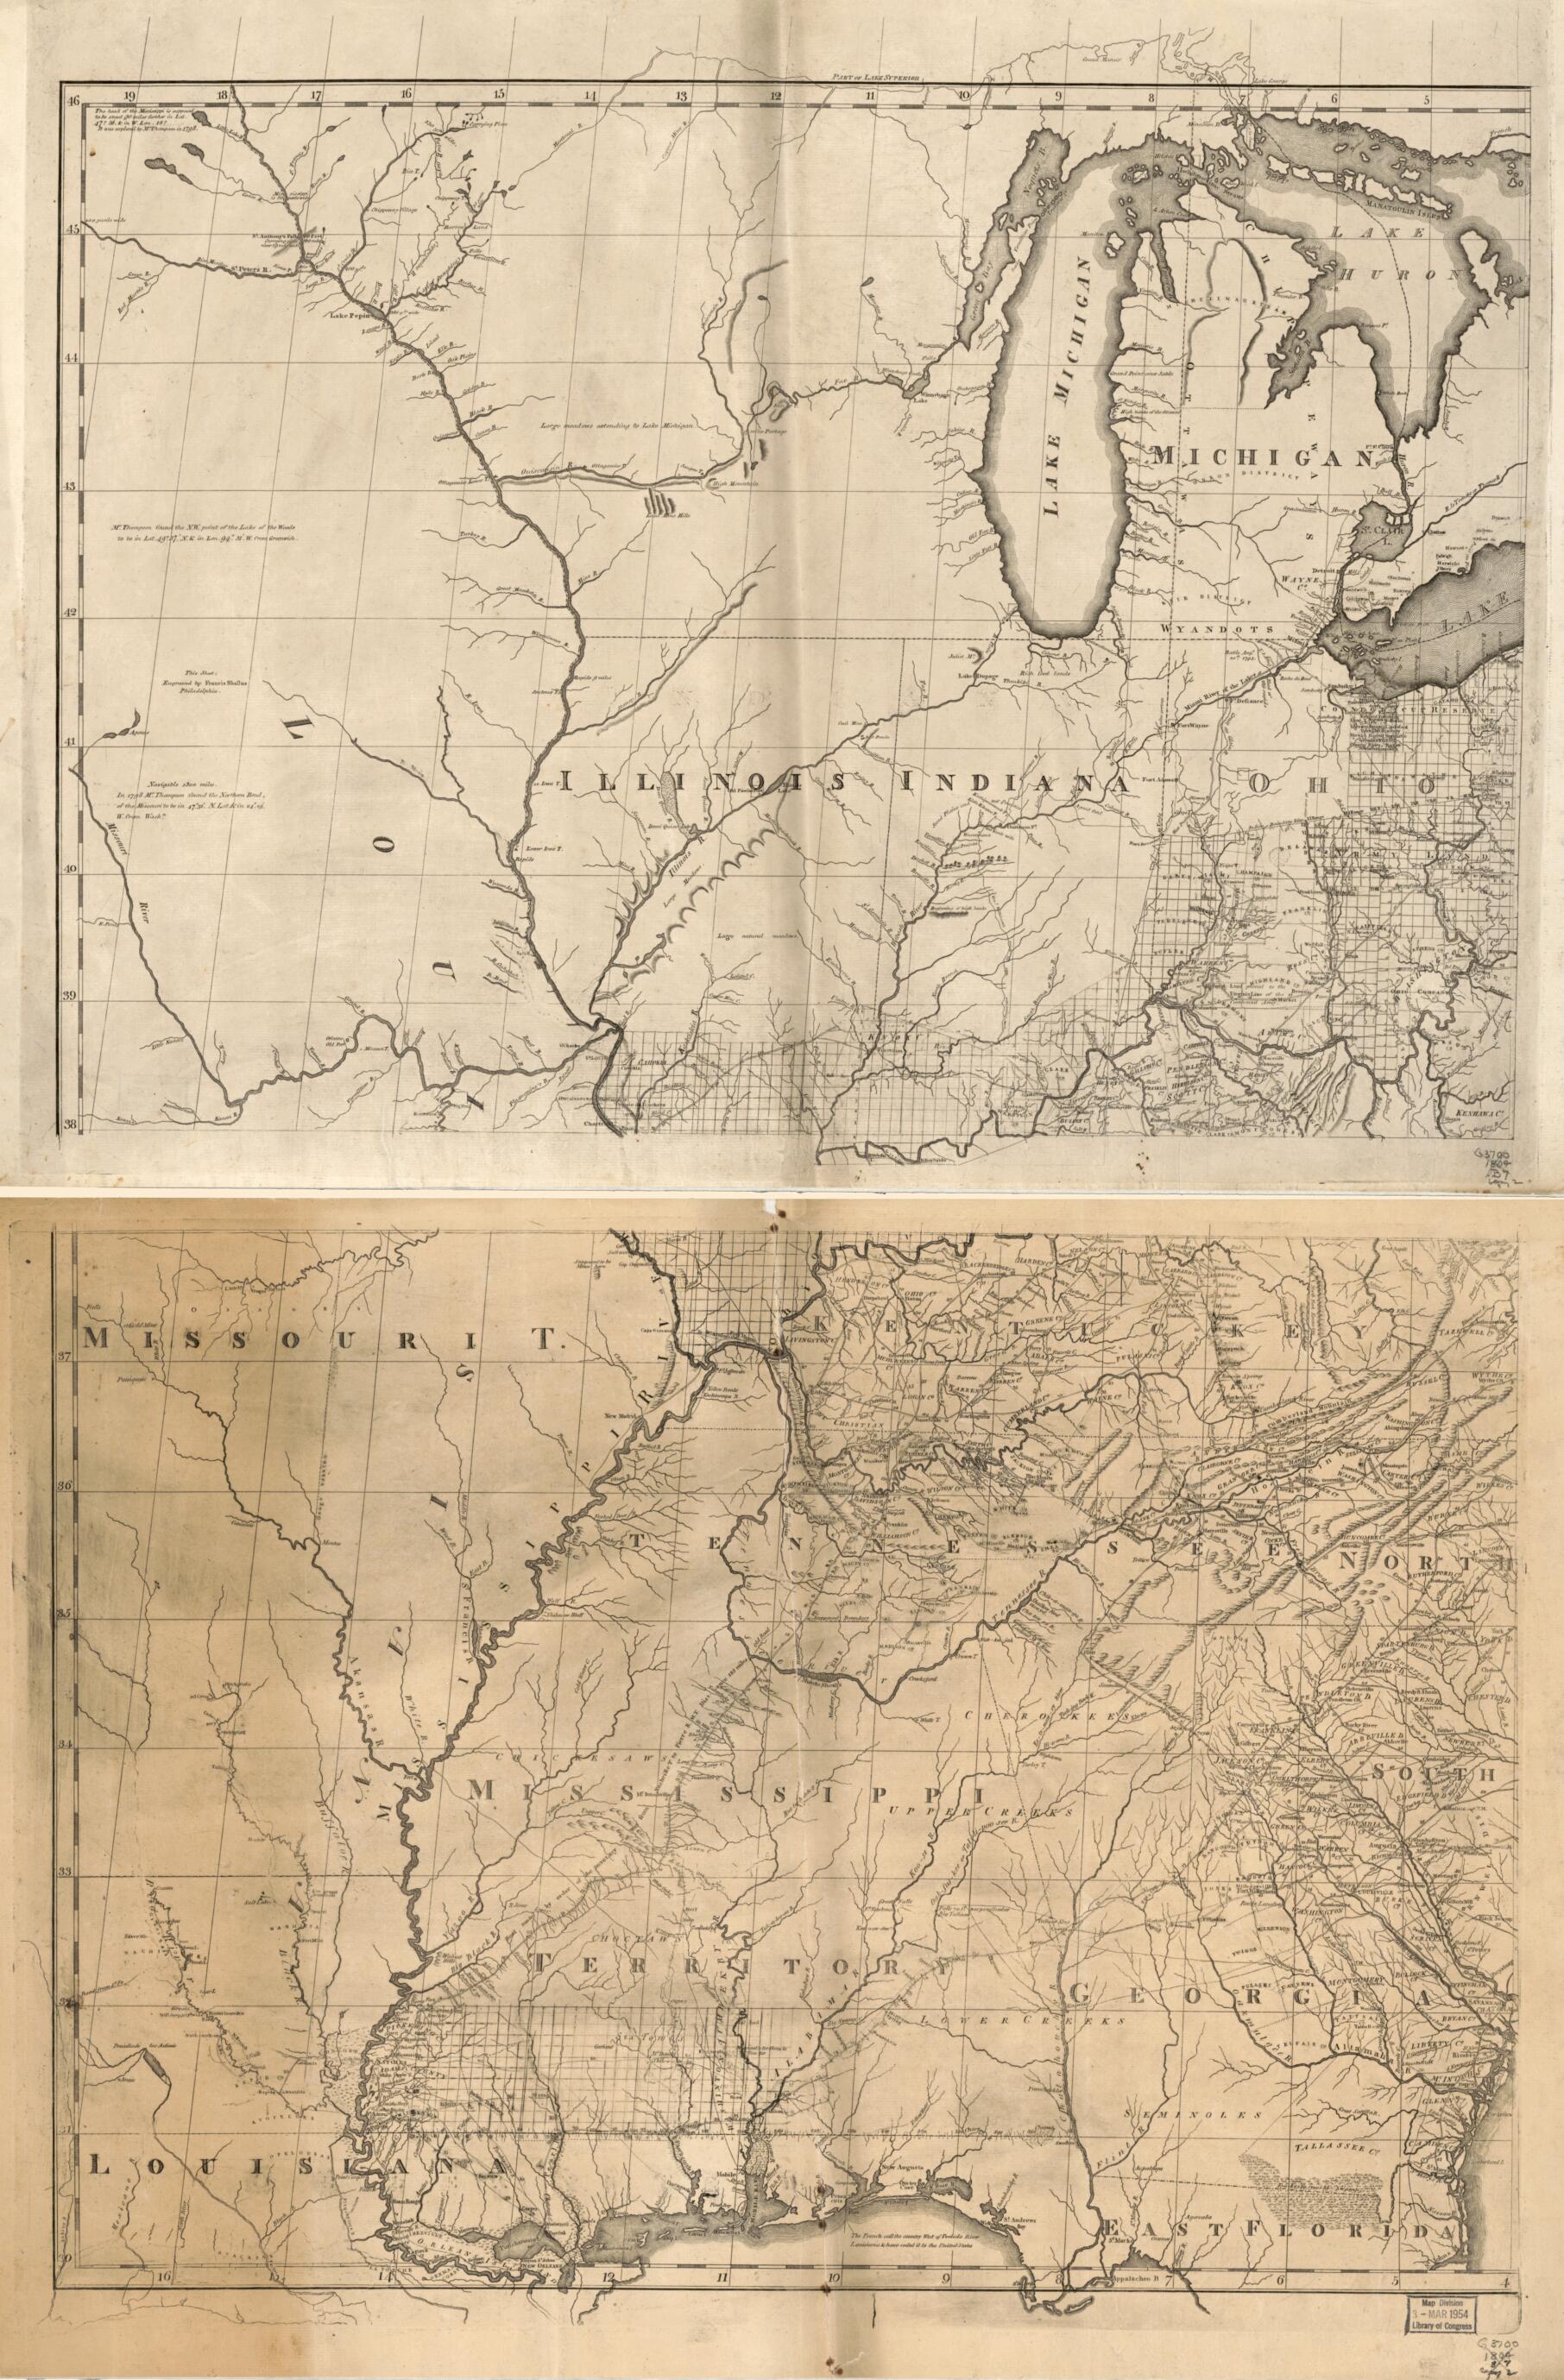 This old map of Roads, the Situations, Connections &amp; Distances of the Post-offices, Stage Roads, Counties &amp; Principal Rivers from 1804 was created by W. (William) Barker, Abraham Bradley, William Harrison in 1804